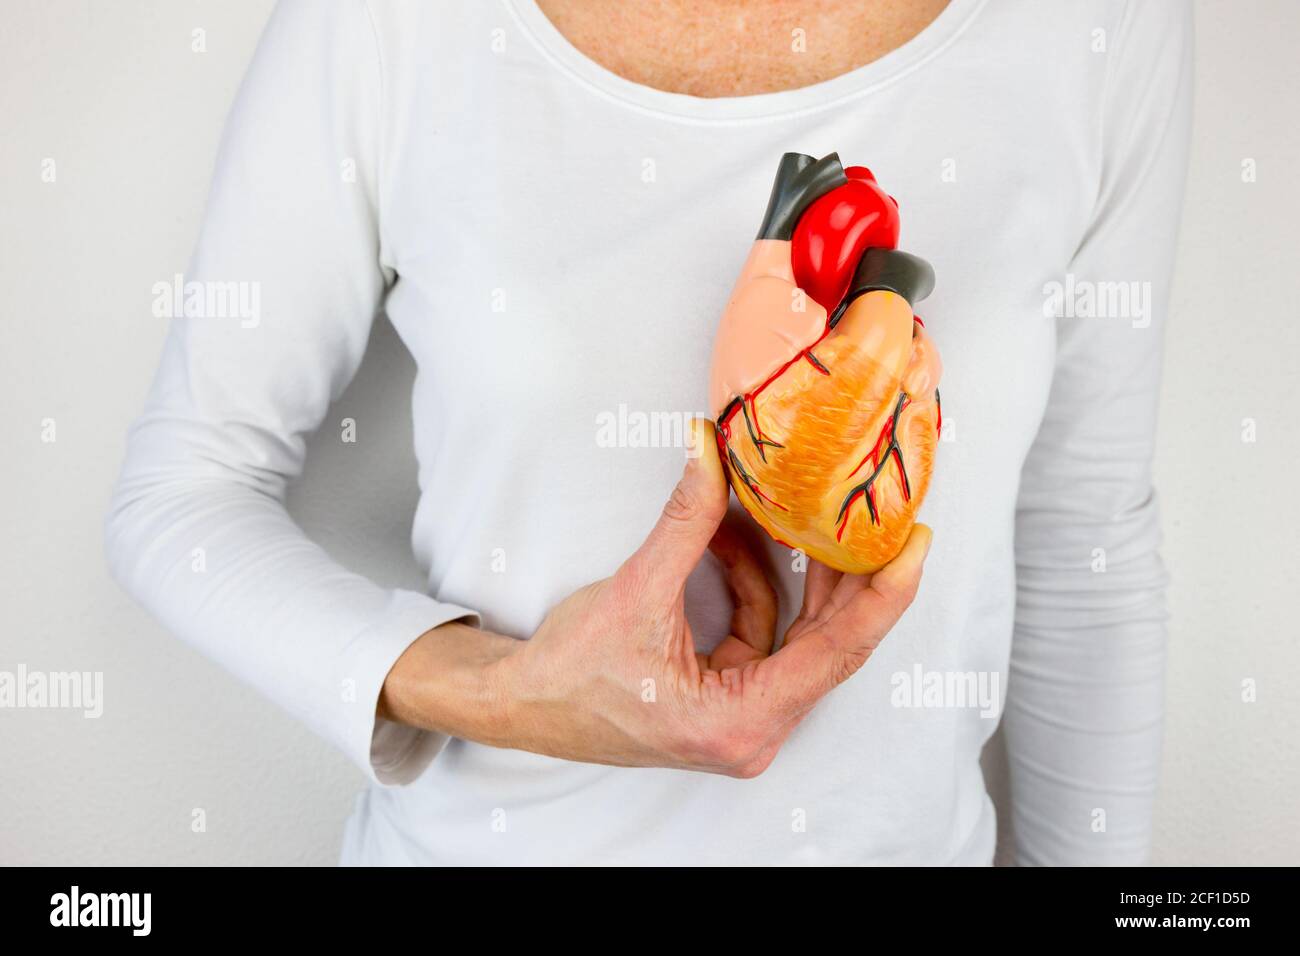 Female person holding human heart model on white body Stock Photo